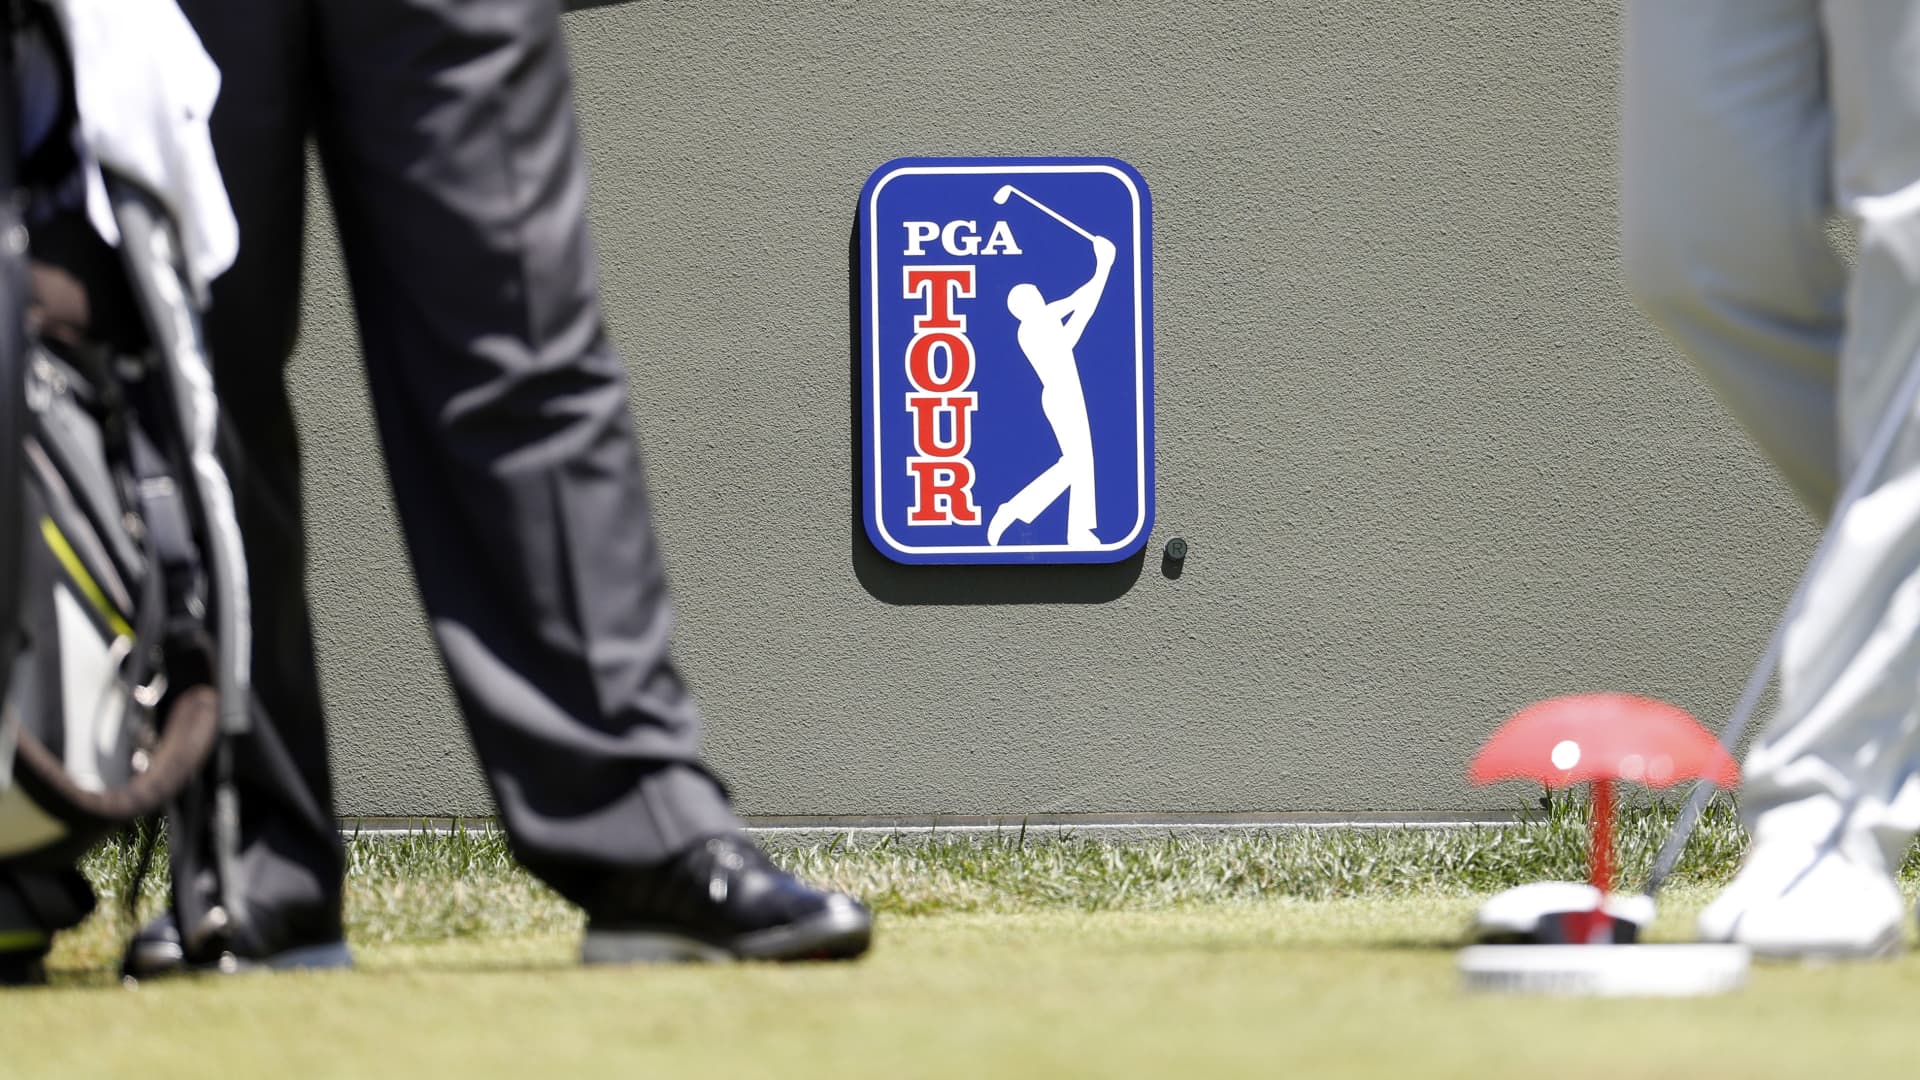 PGA Tour gets investment from Strategic Sports Group amid LIV talks